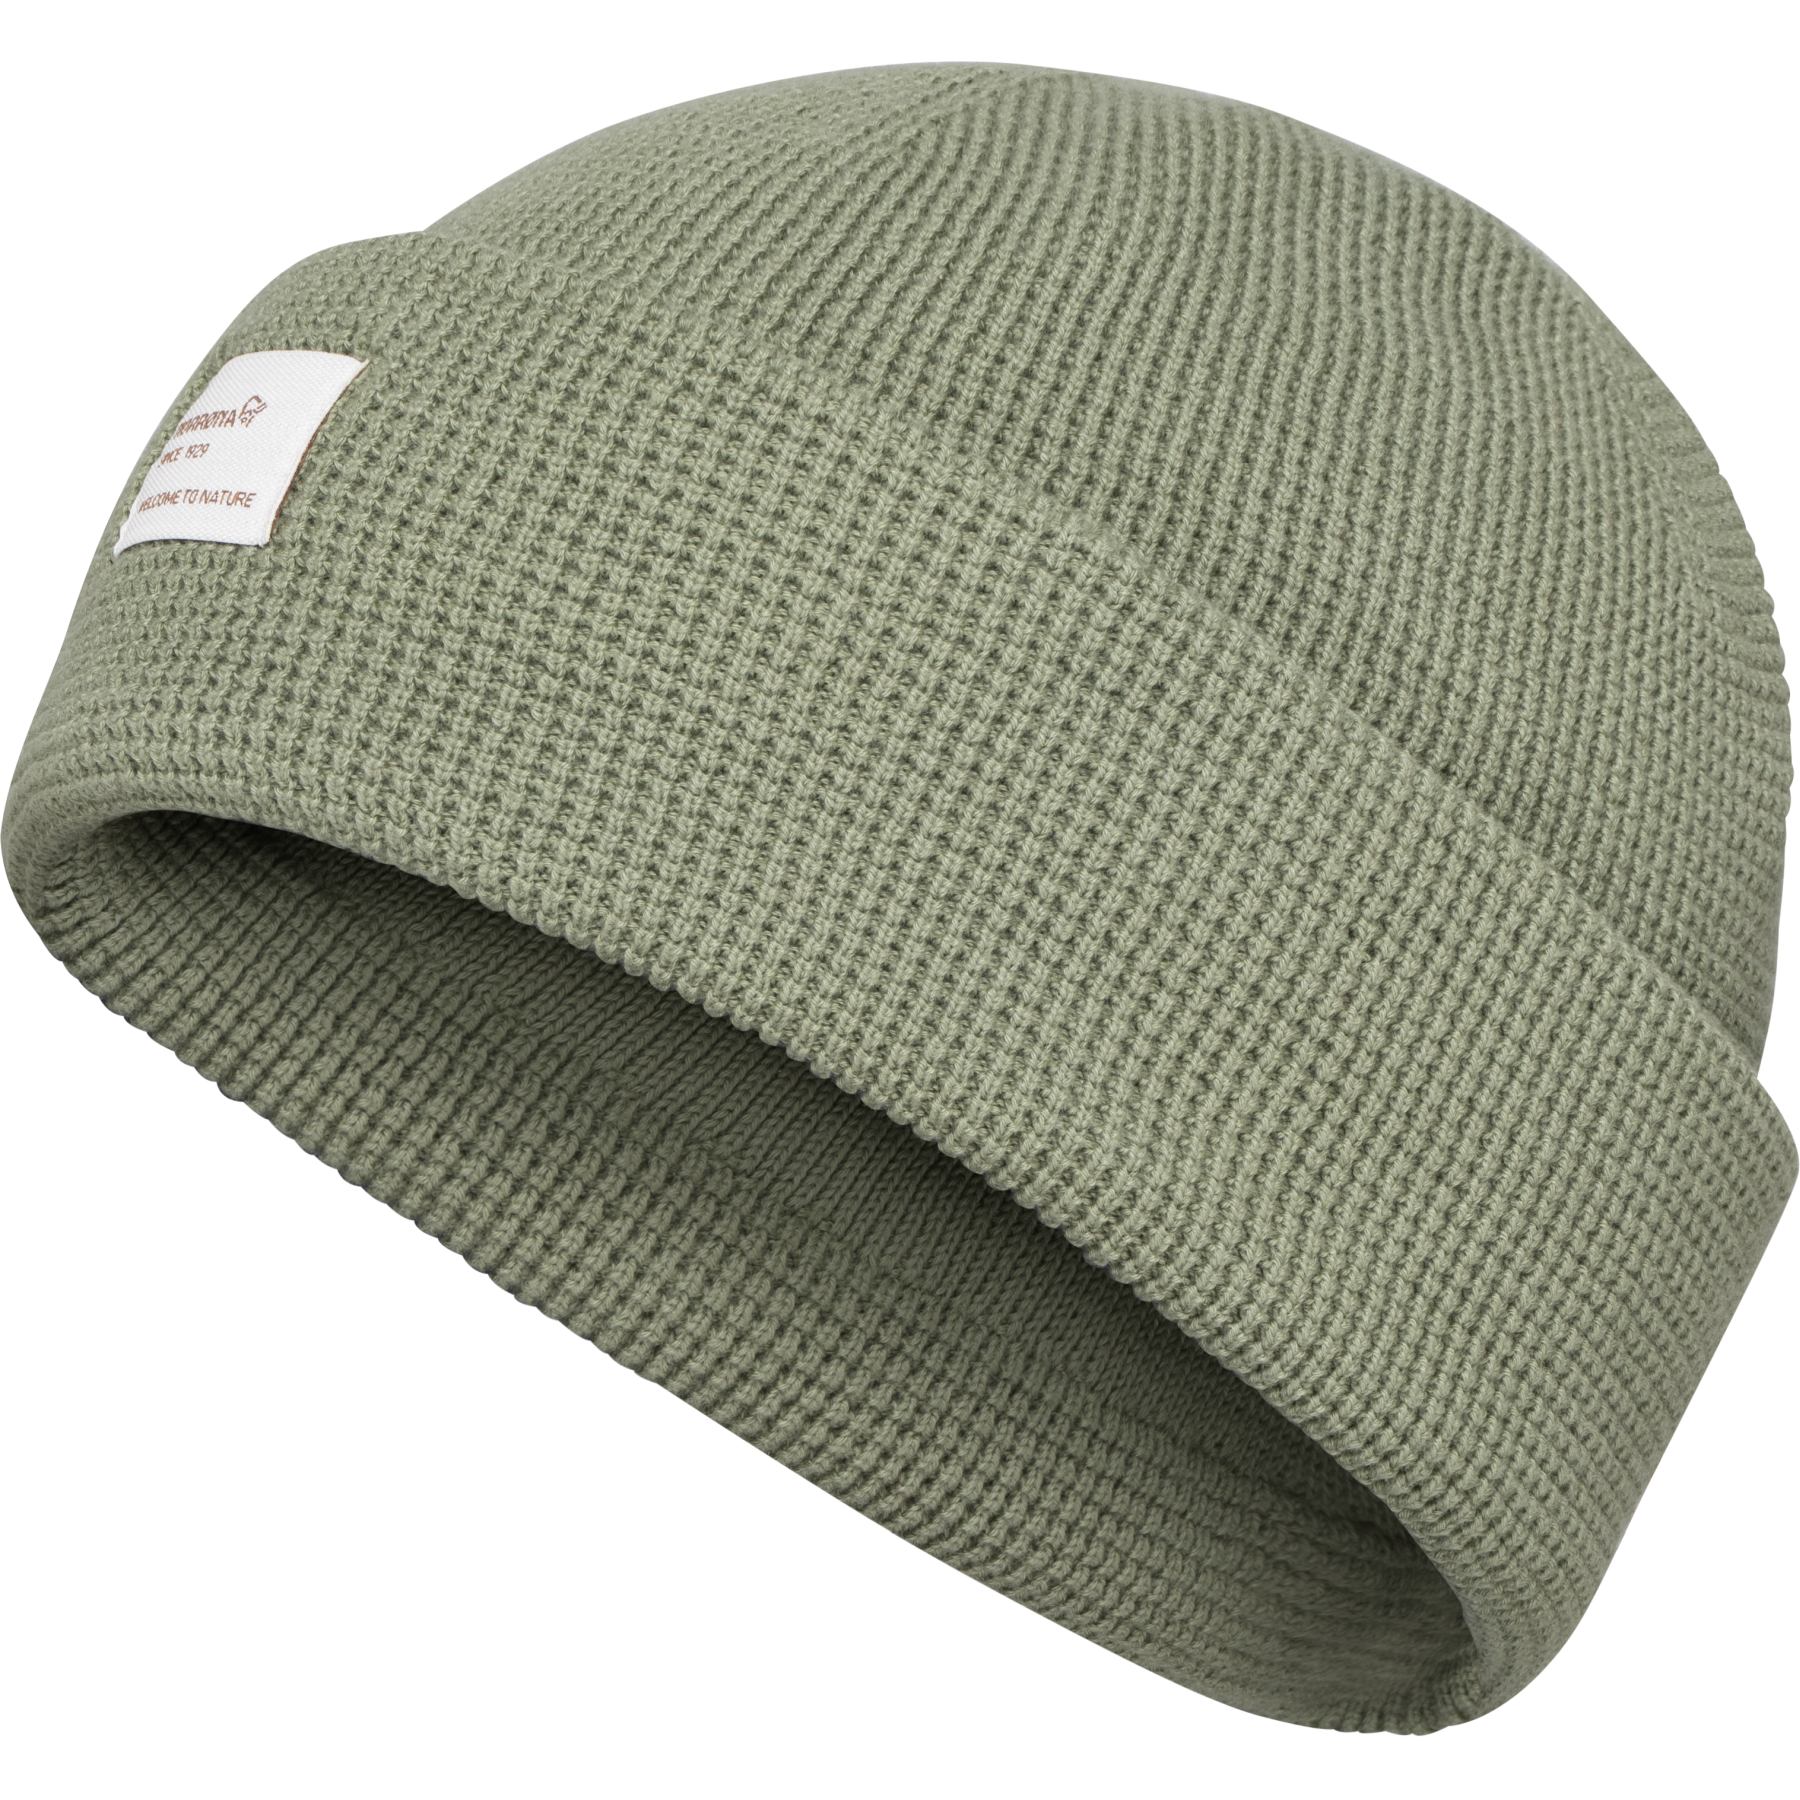 Picture of Norrona /29 heavy cotton Beanie - Loden Green